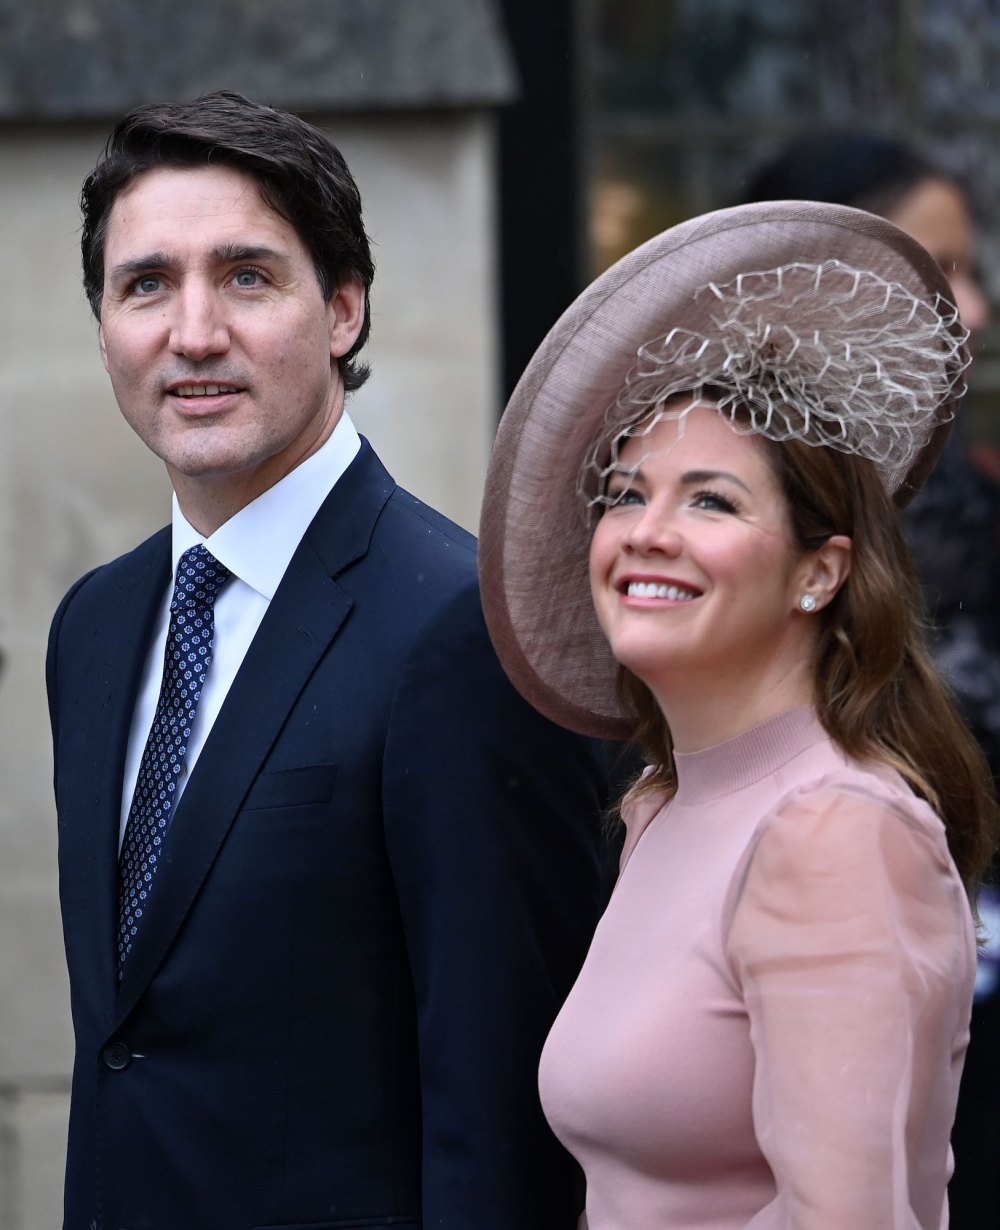 Canadian Prime Minister Justin Trudeau and Wife Sophie Gregoire Trudeau Split After 18 Years of Marriage